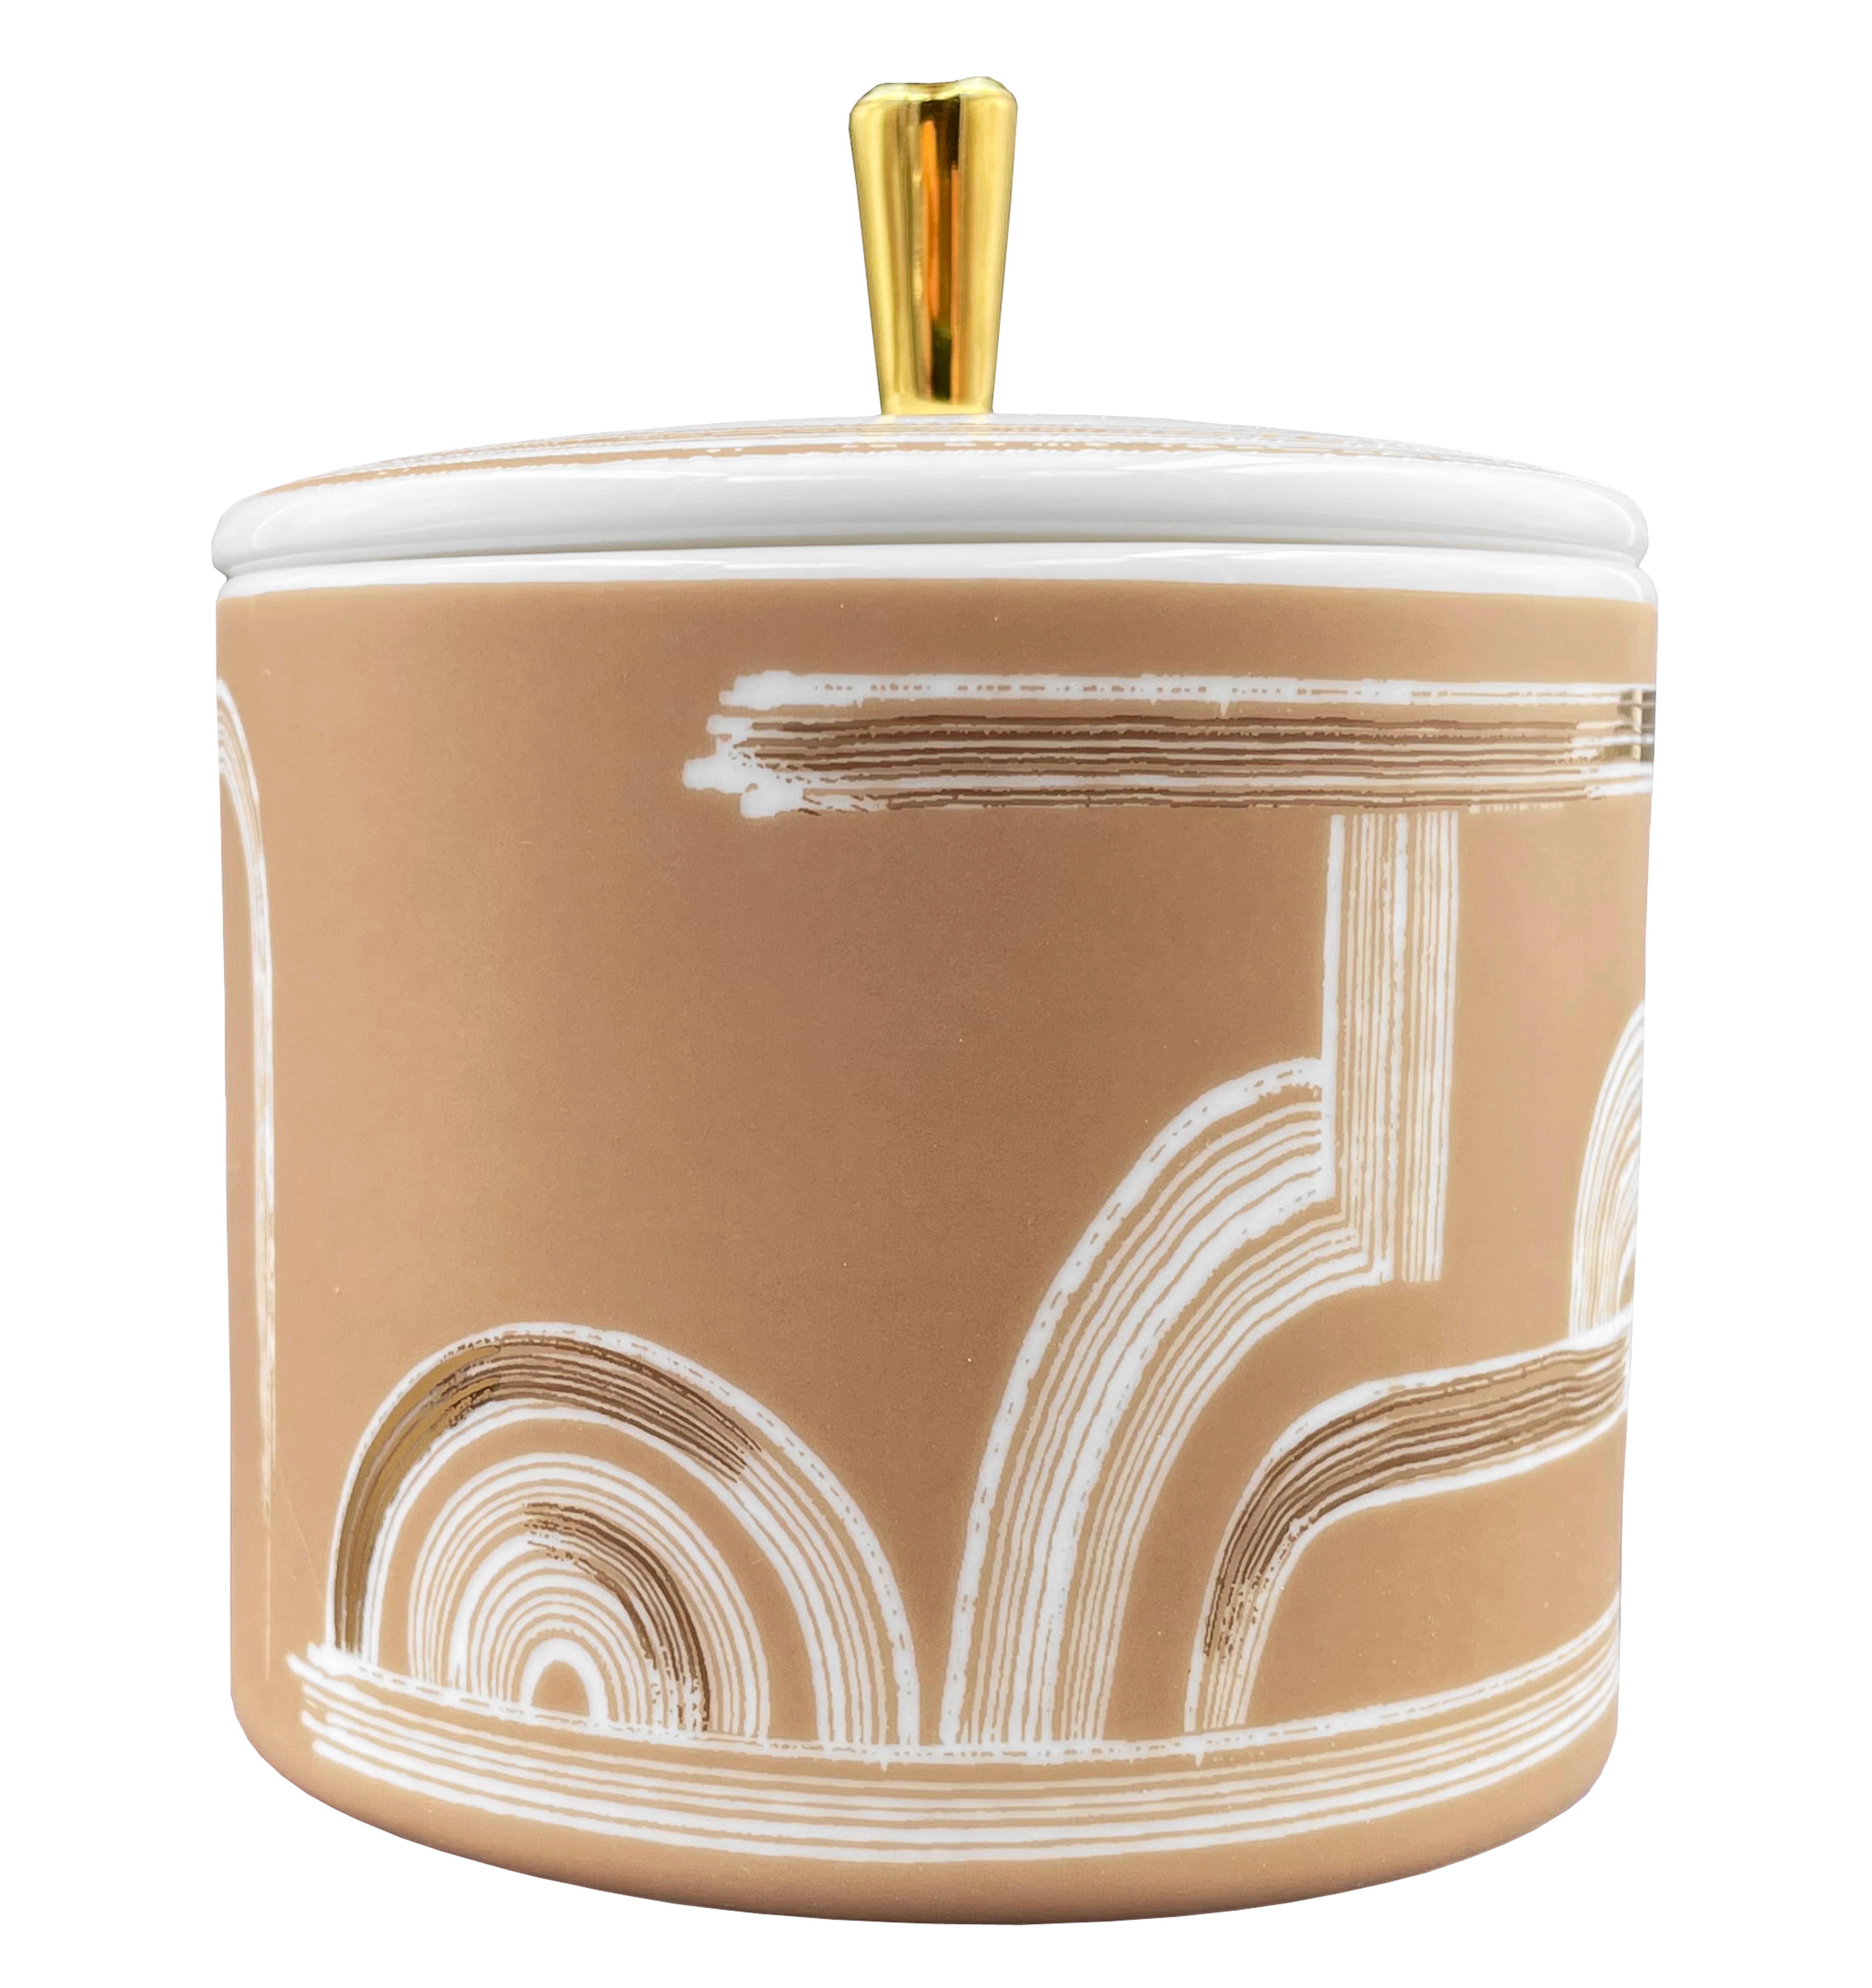 Description: Cylindrical box with lid (2 pieces)
Color: Beige gold
Size: 9 Ø x 10.5 H cm
Material: Porcelain and gold
Collection: Art Déco Garden

Larger quantities available upon request, with 8 weeks production time.